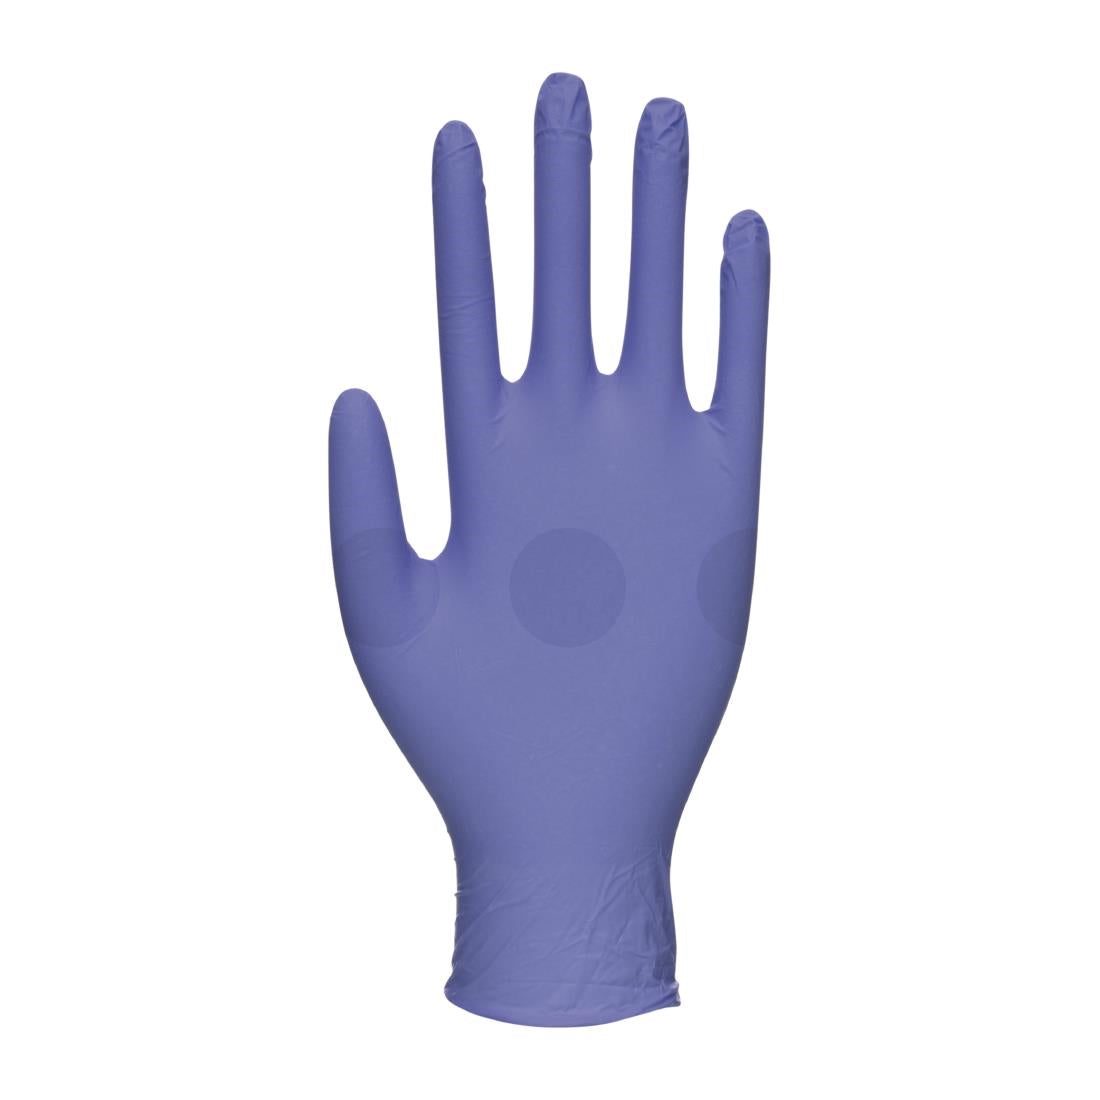 FW844-L Biotouch Single Use Glove Violet Blue Nitrile Powder Free Size Large (Pack of 100)